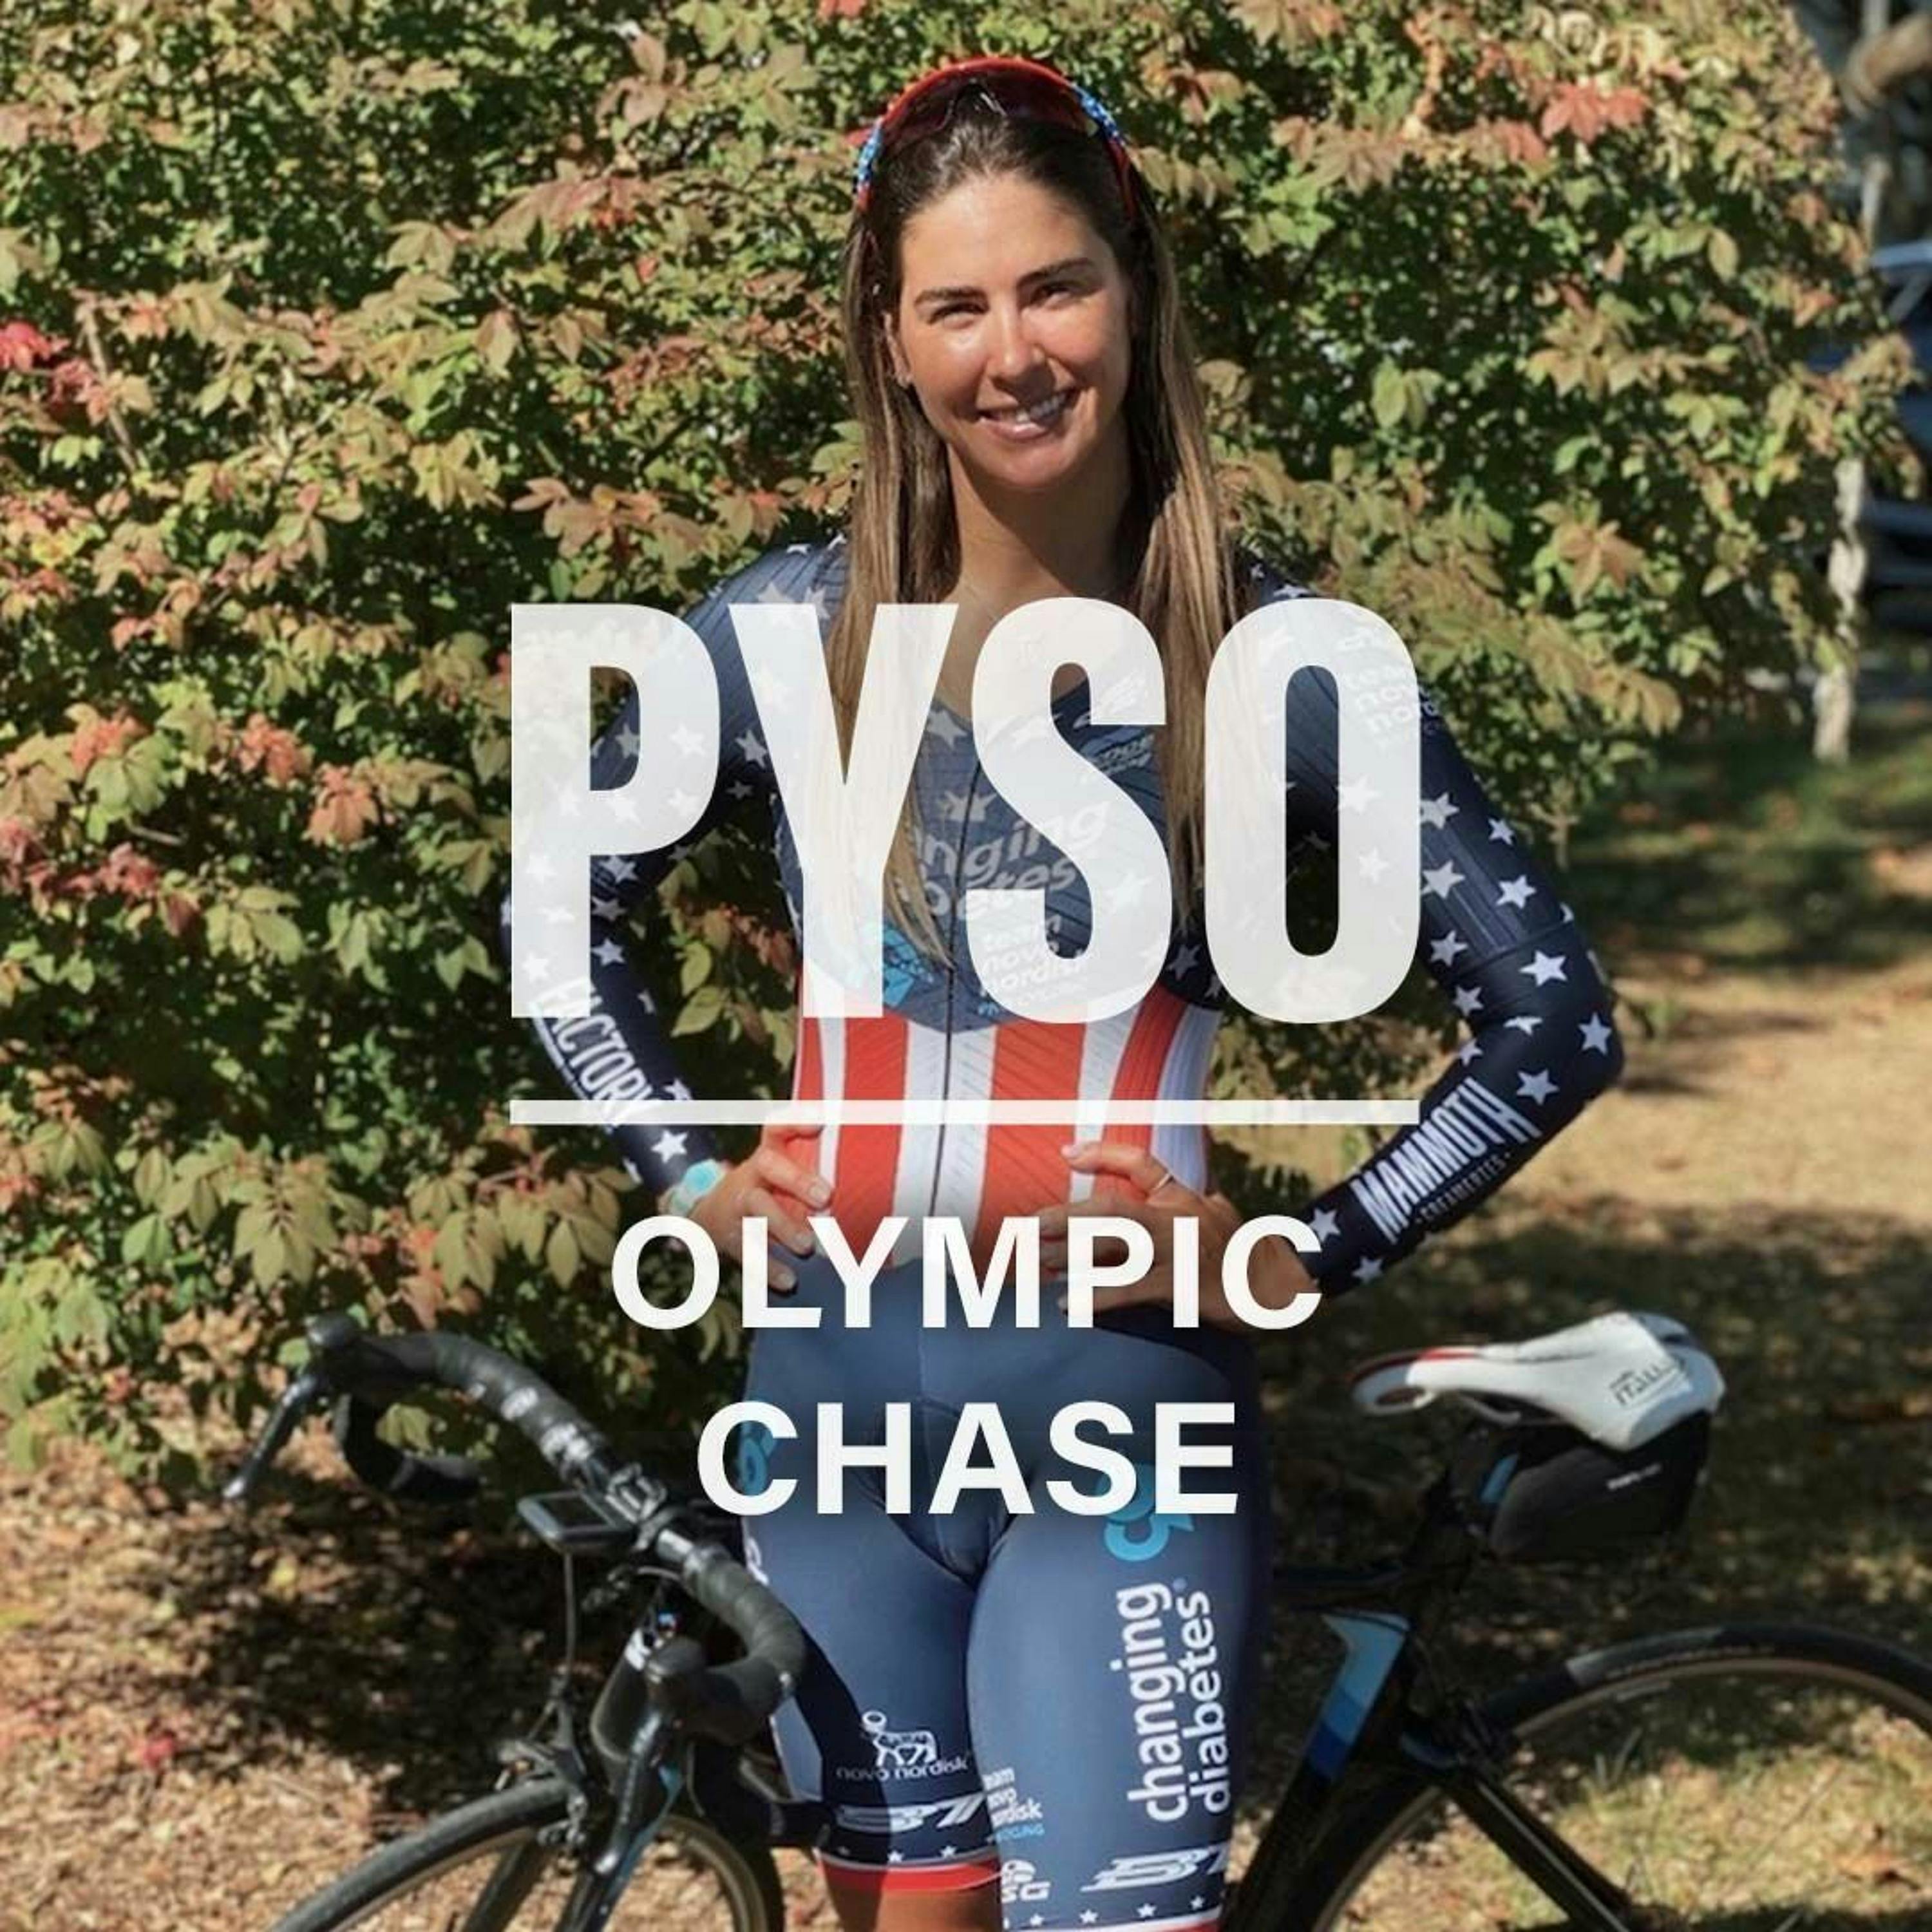 PYSO, ep. 77: Olympic long team member Mandy Marquardt has 18 national titles — and diabetes